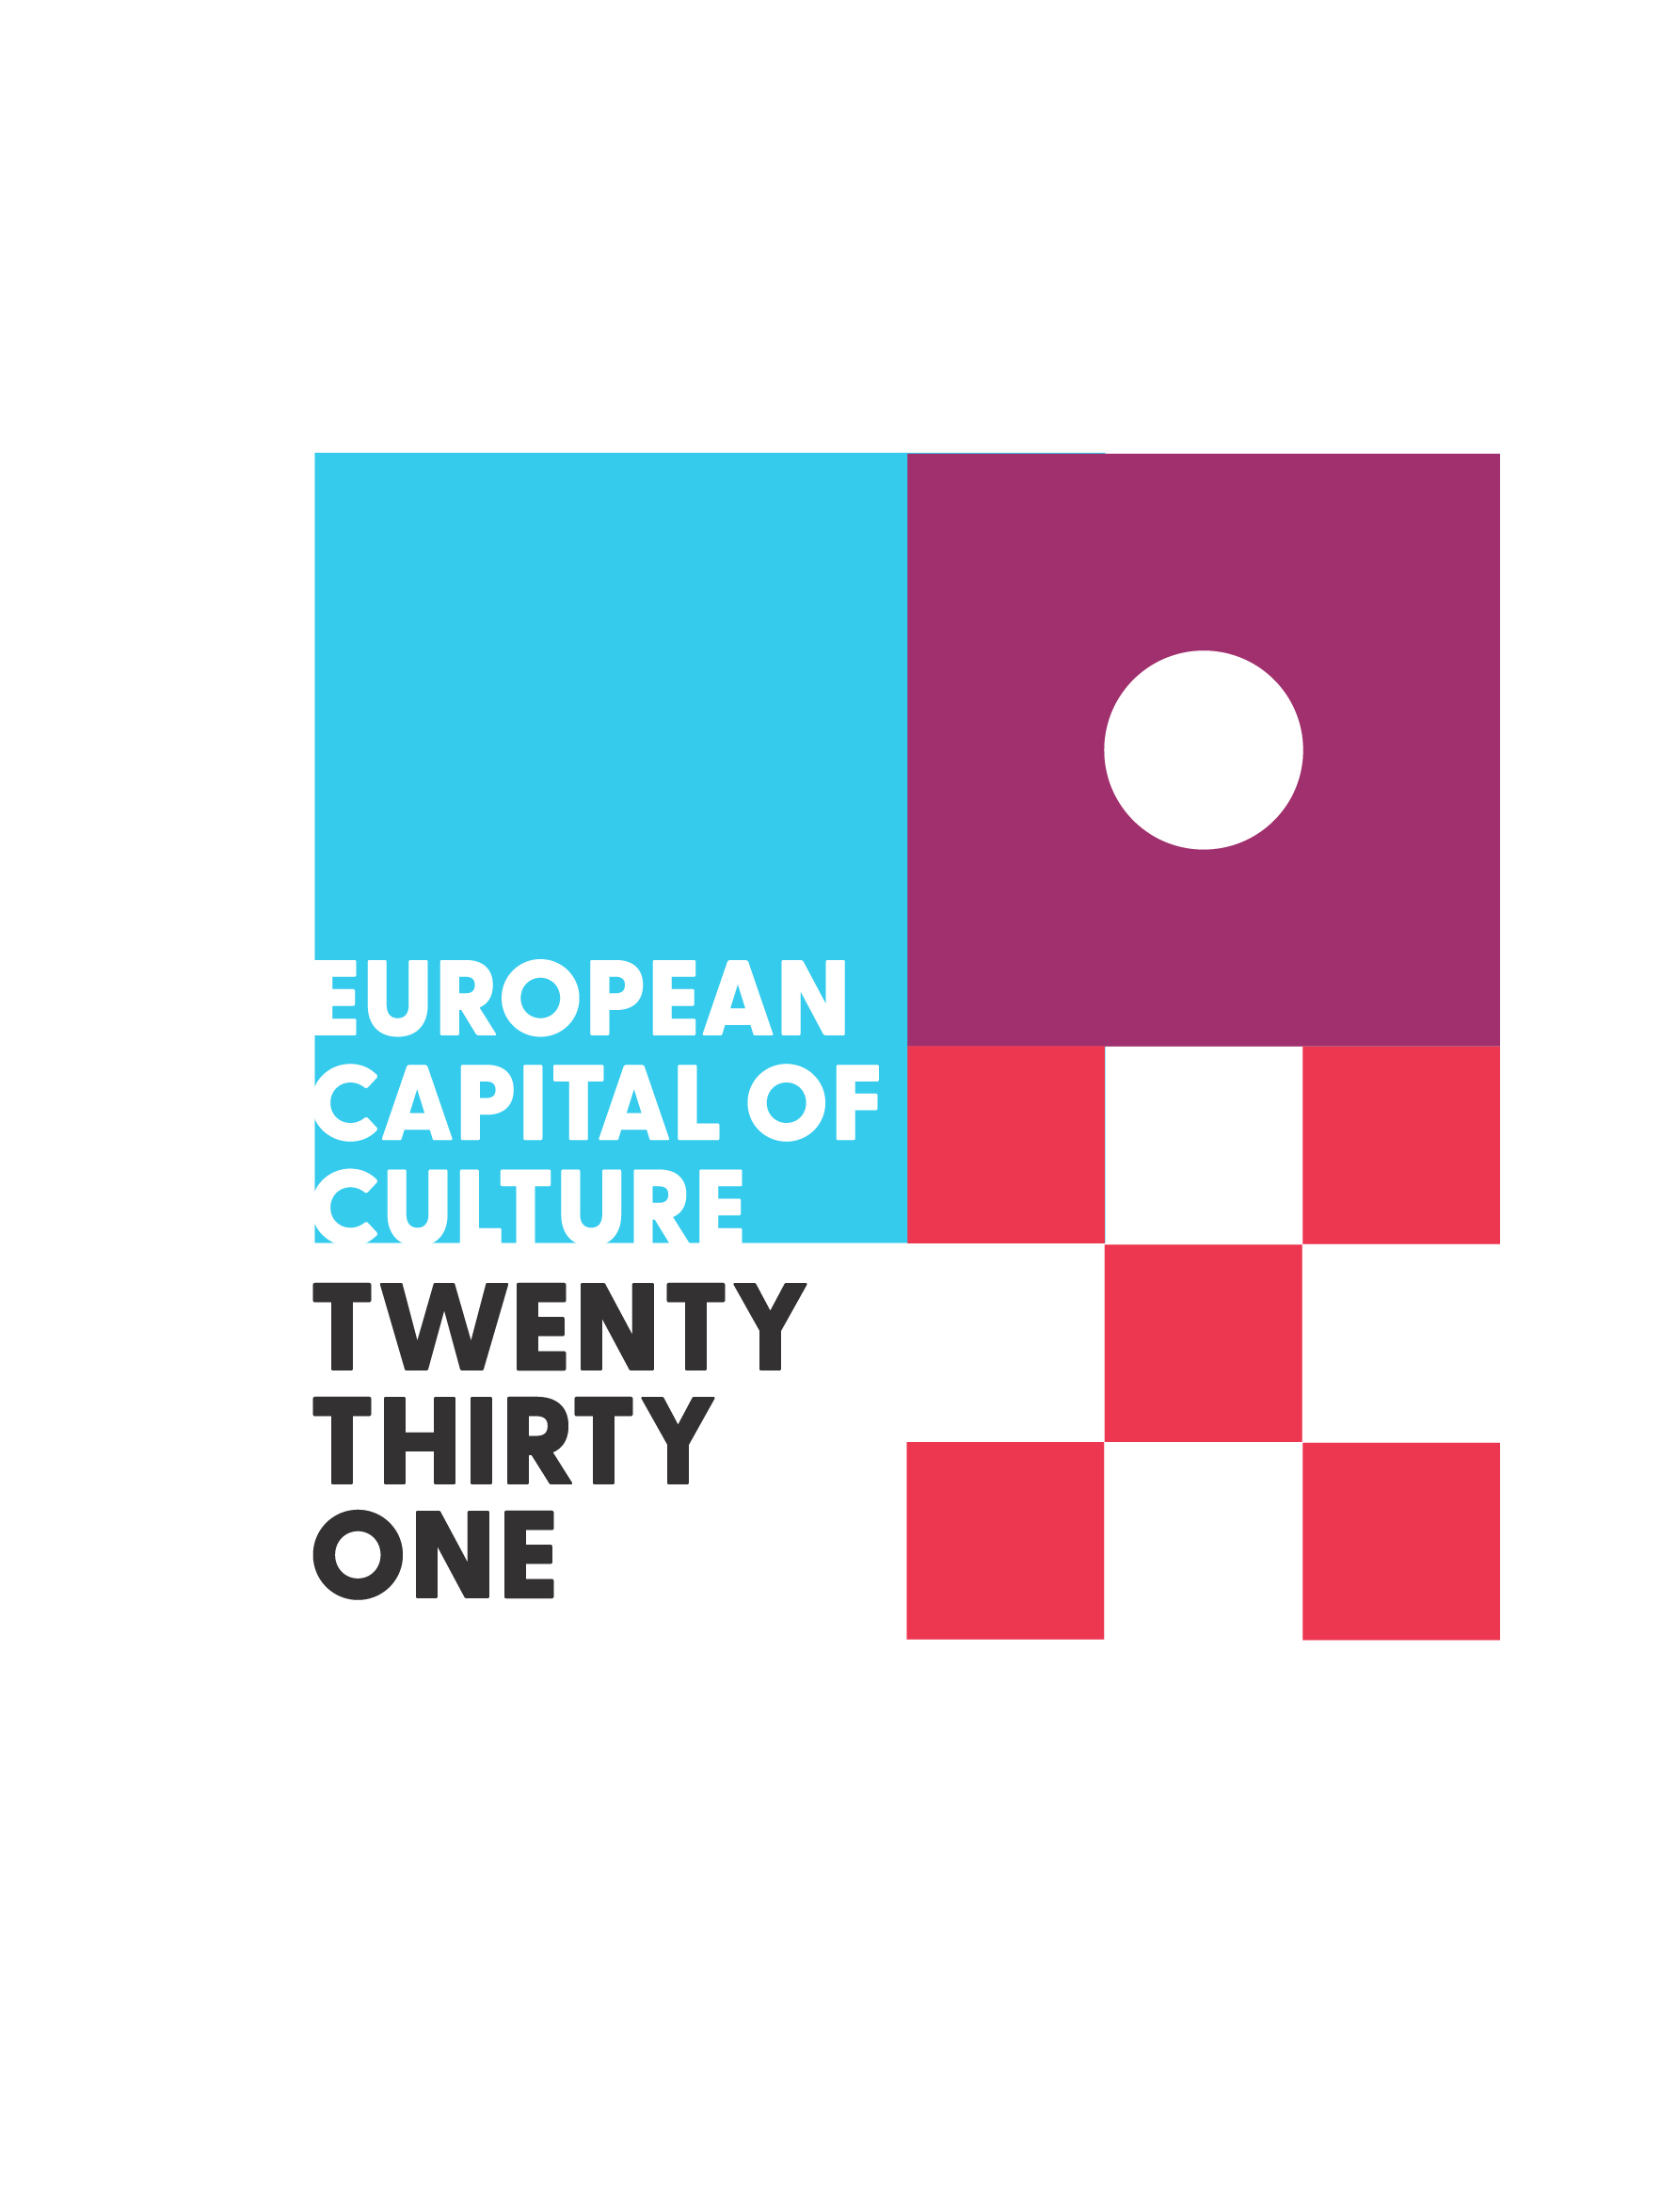 Seminar about the European Capital of Culture